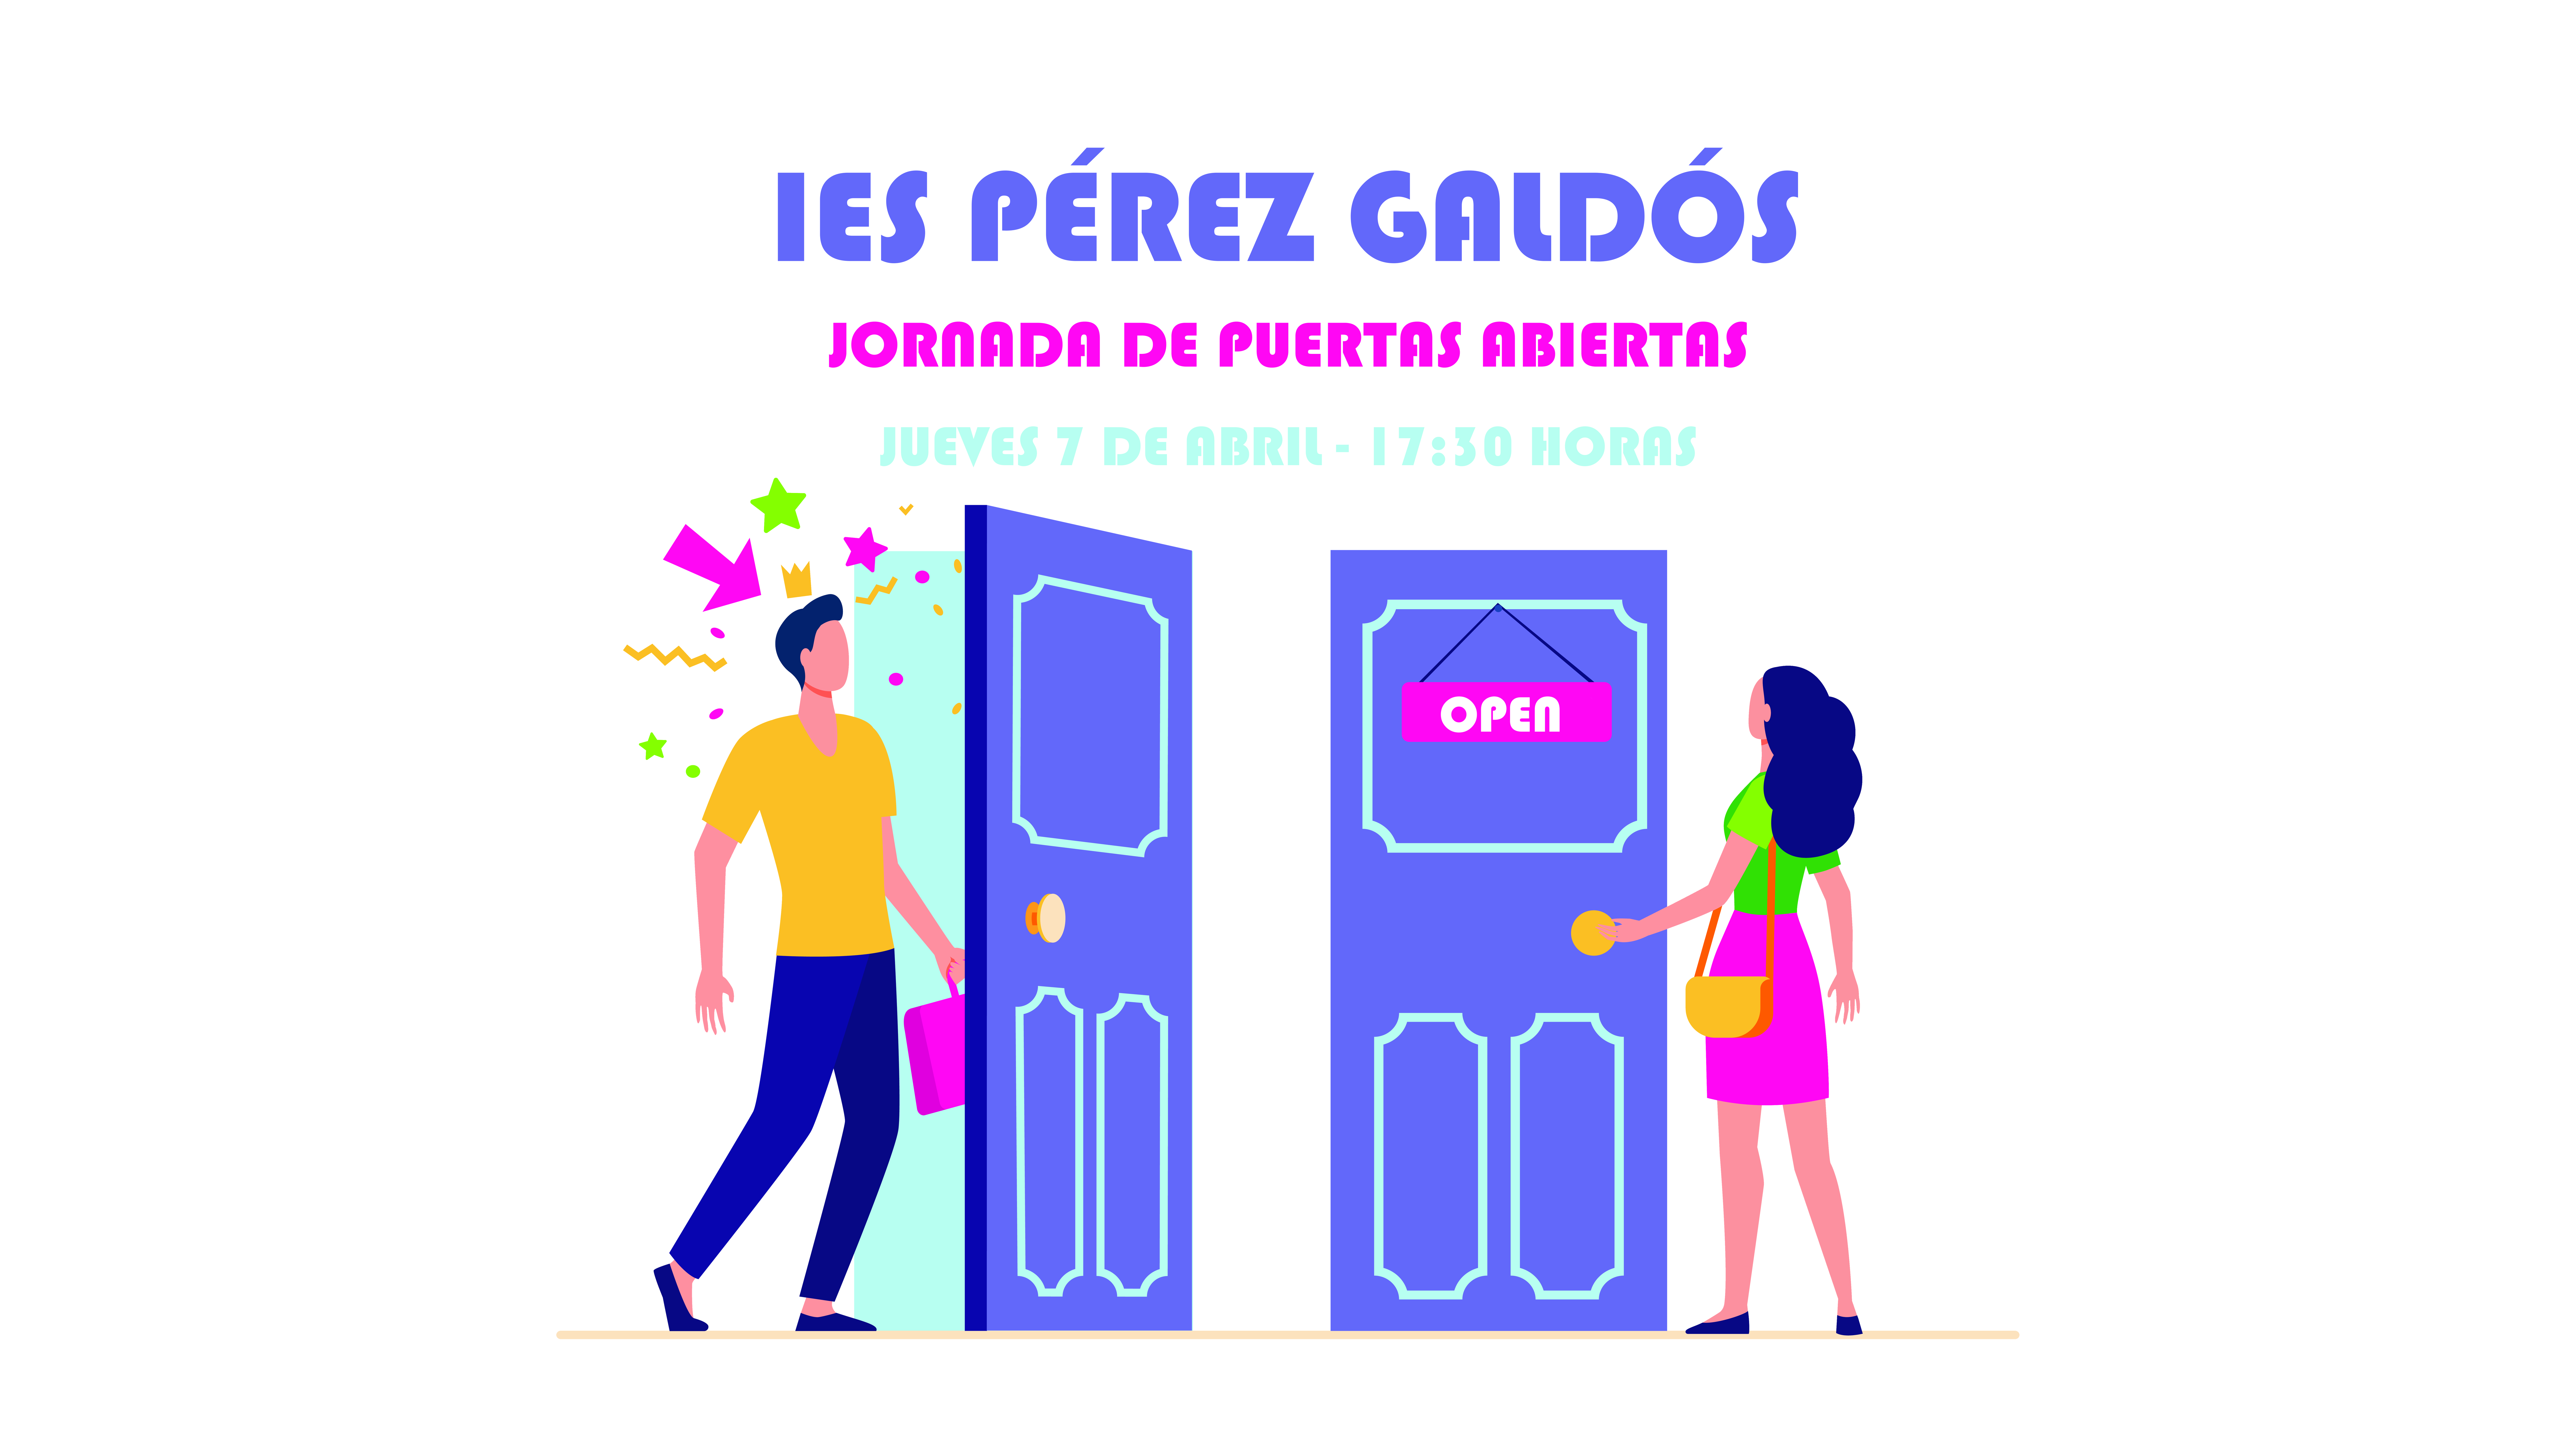 Woman standing in rain and thunderstorm at close door. Man coming by open door with festive confetti. Vector illustration for gender inequality, business discrimination, social issues concept